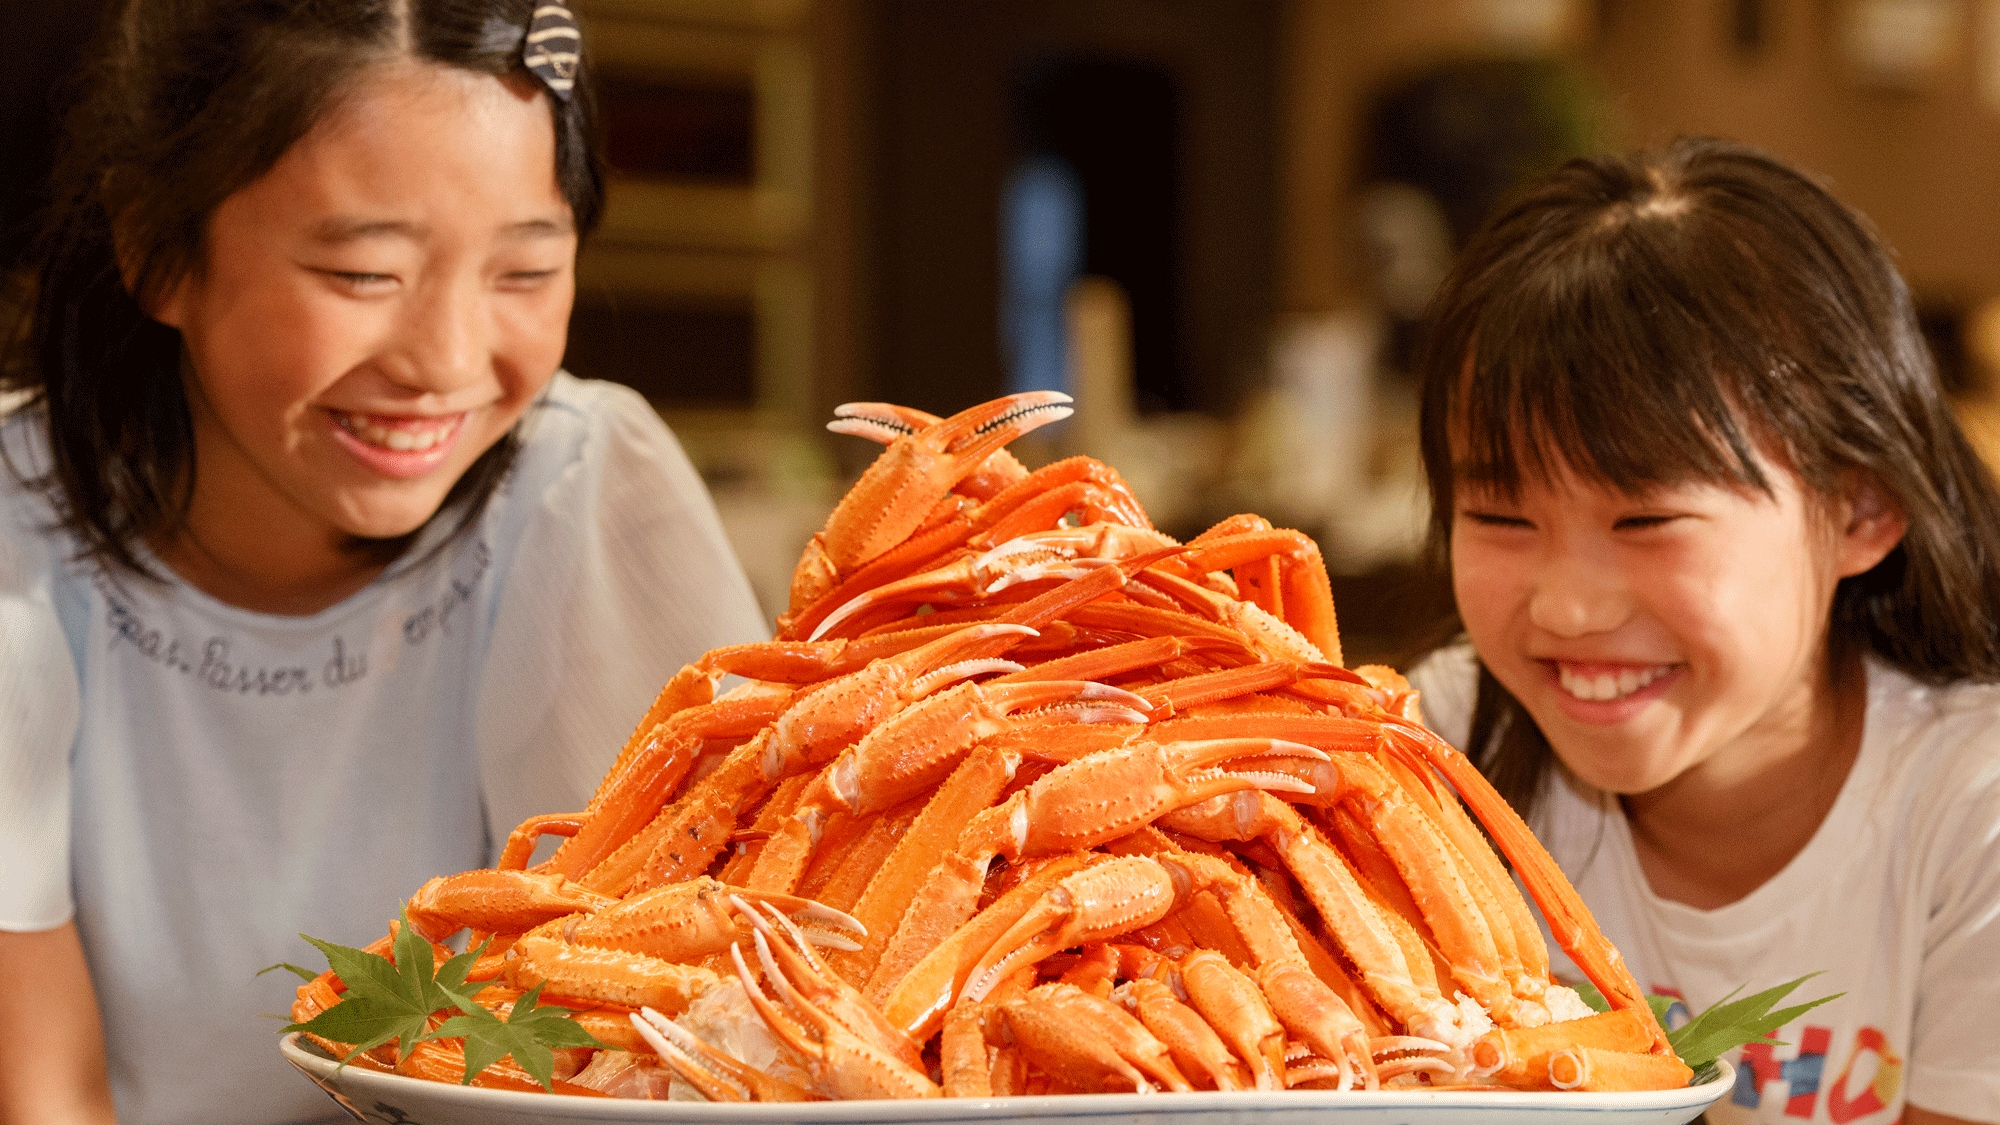 [Limited time] All-you-can-eat crab buffet